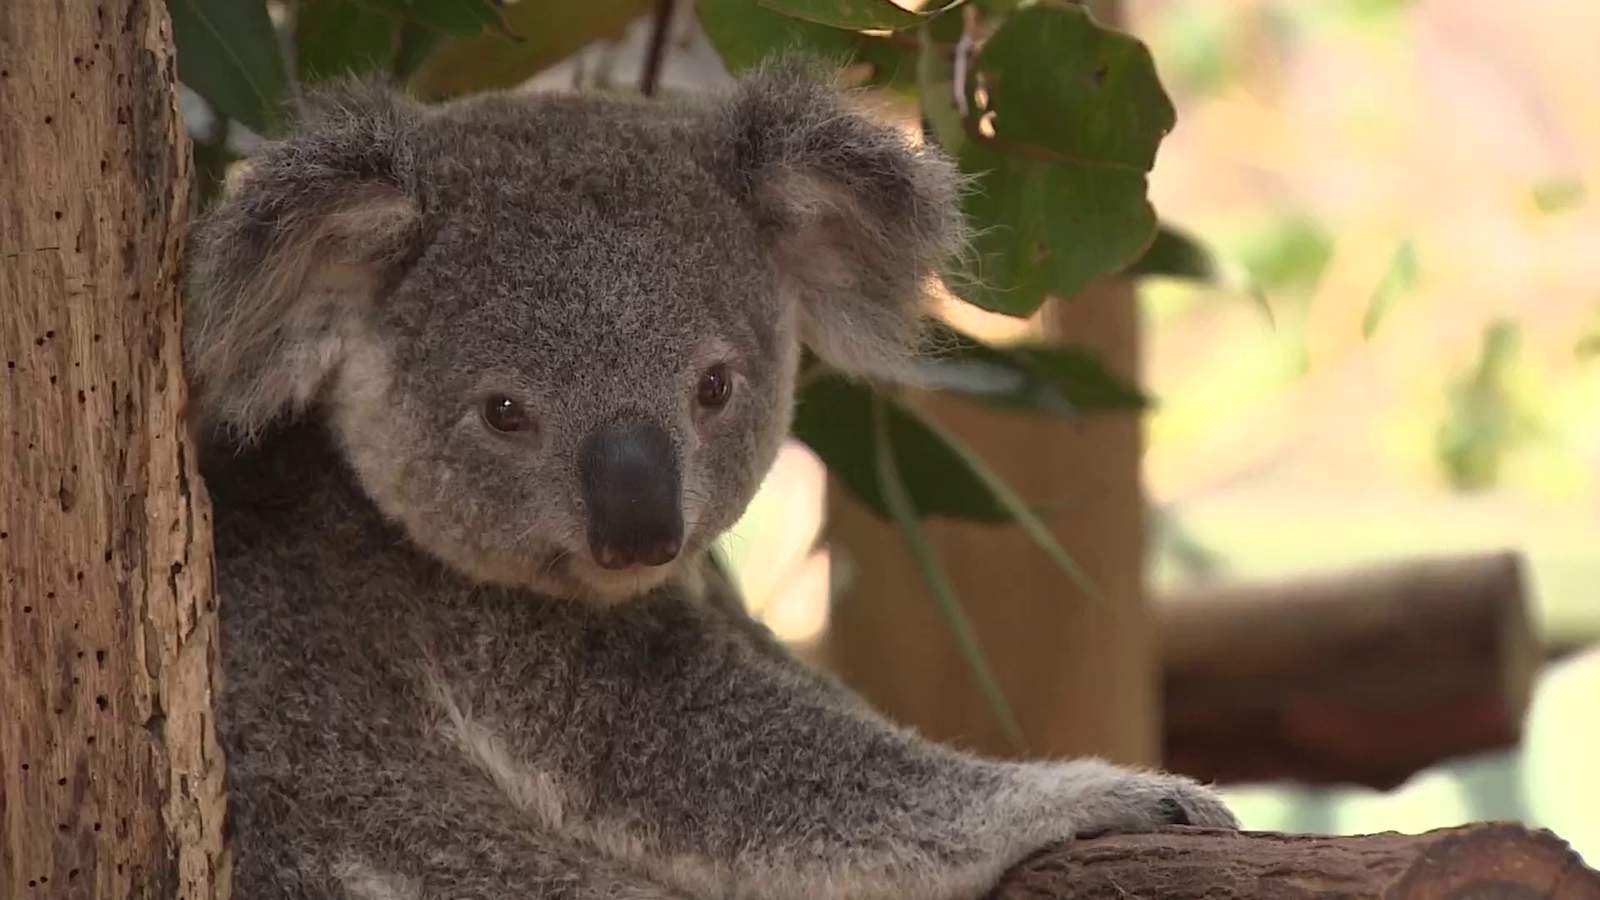 Up to 30% of koalas may have died in bush fires